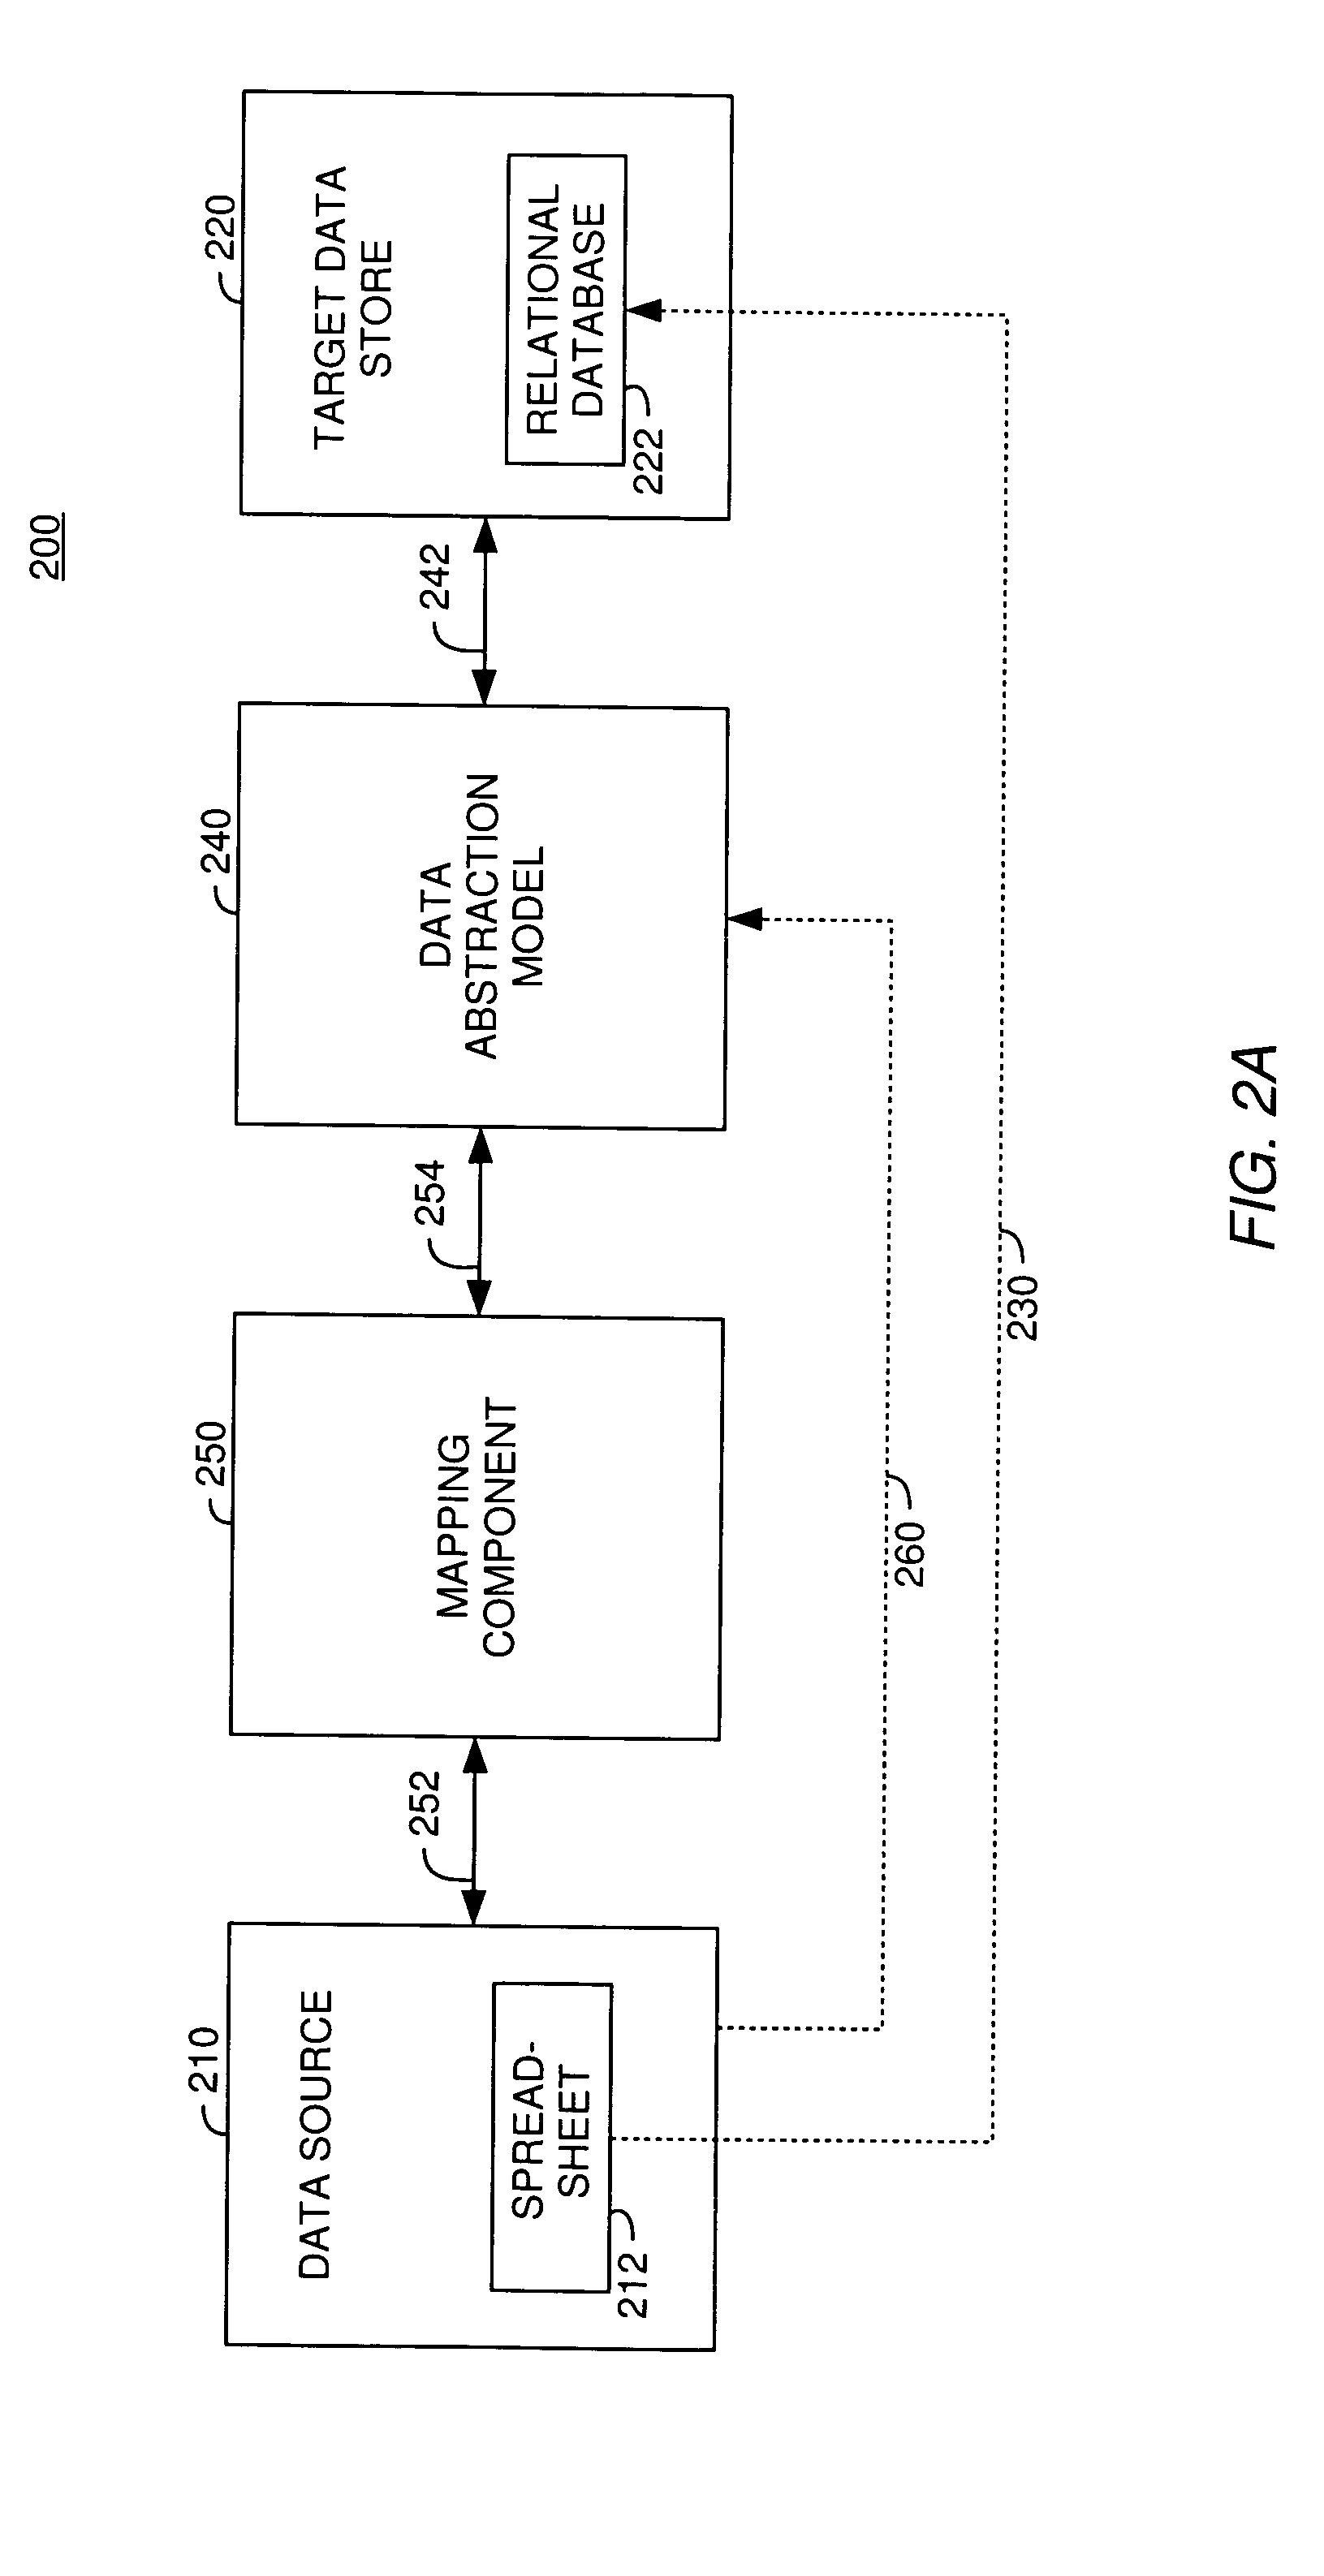 Extensible framework supporting deposit of heterogenous data sources into a target data repository